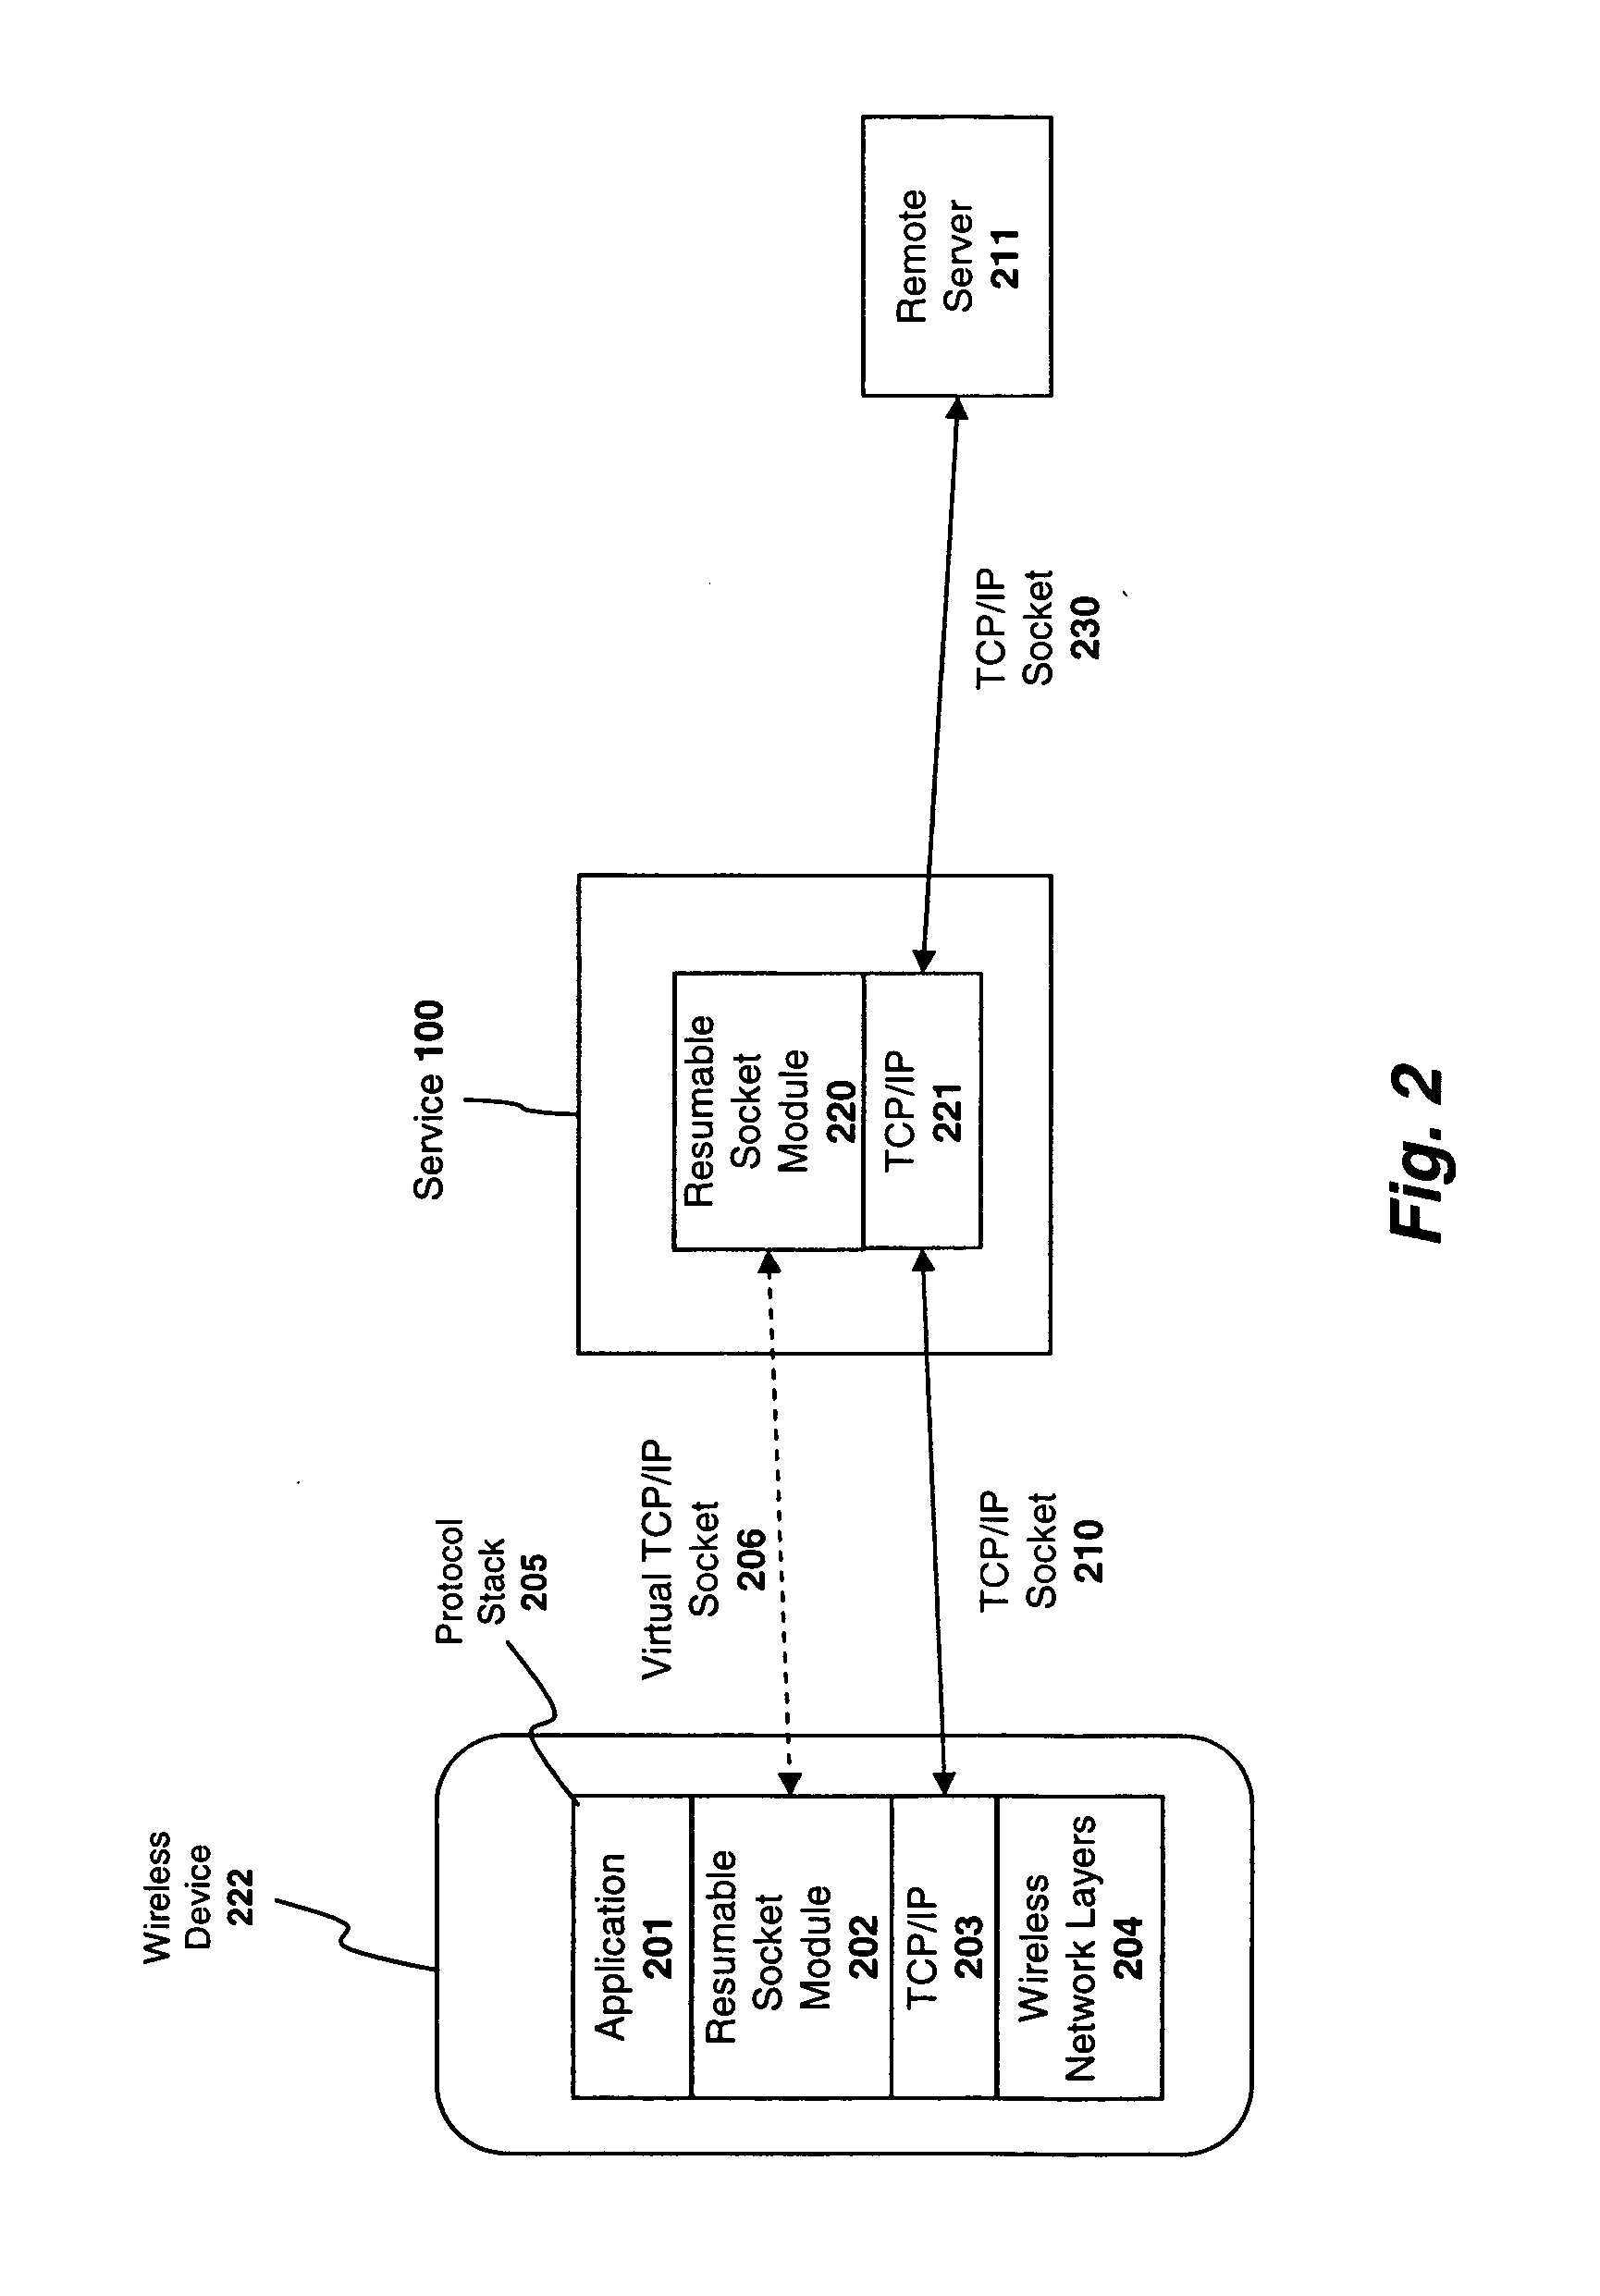 System and method for preserving socket connections over a wireless network